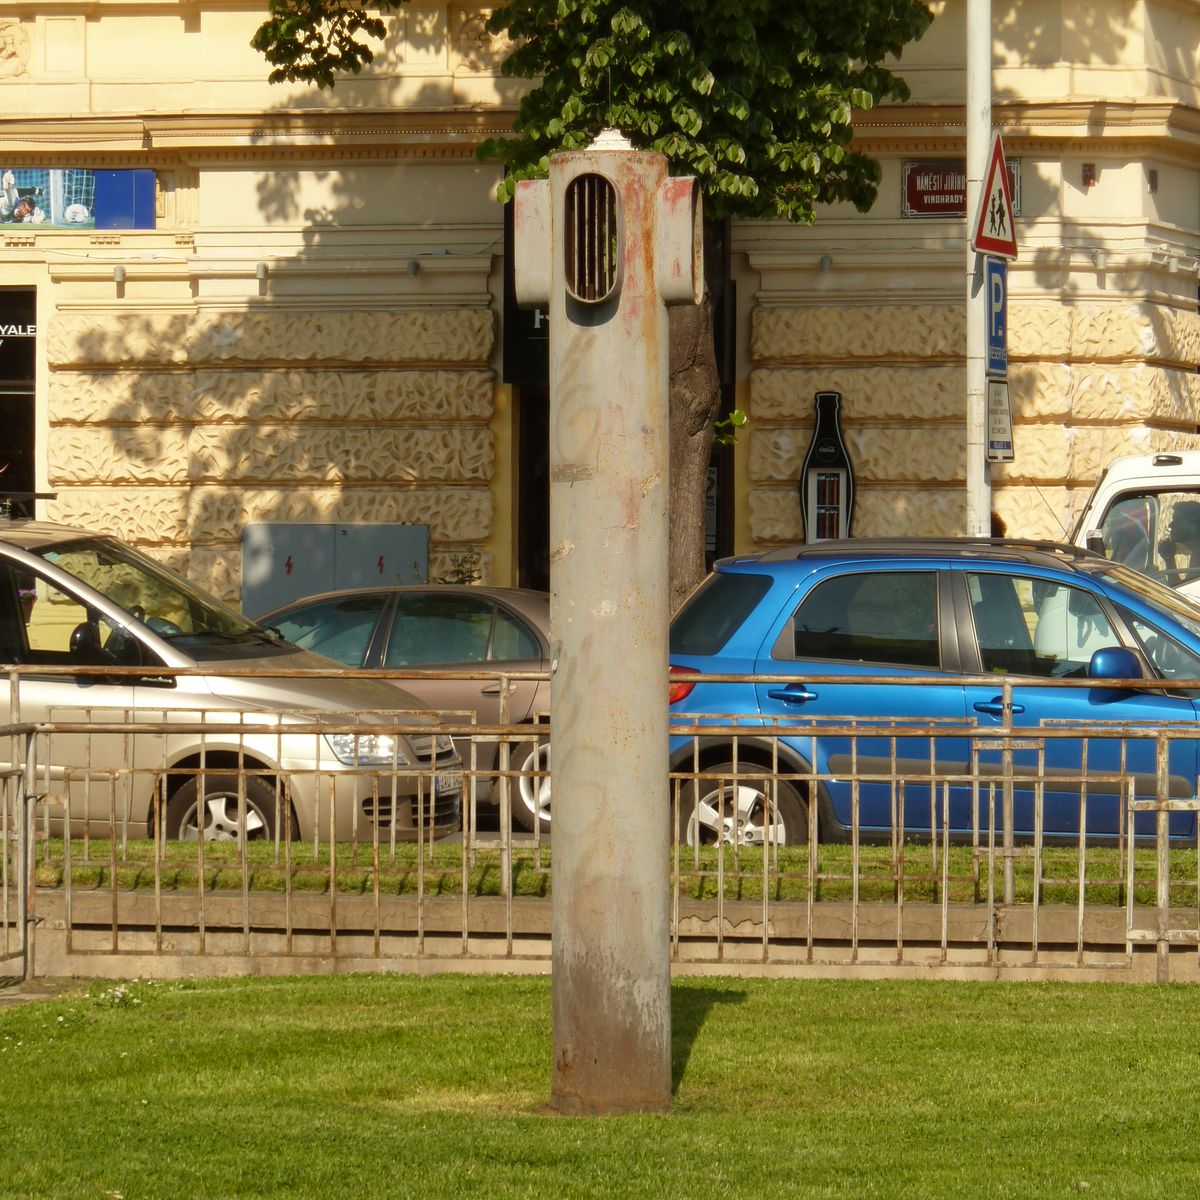 an old, rusted pole sits in the grass next to a blue car